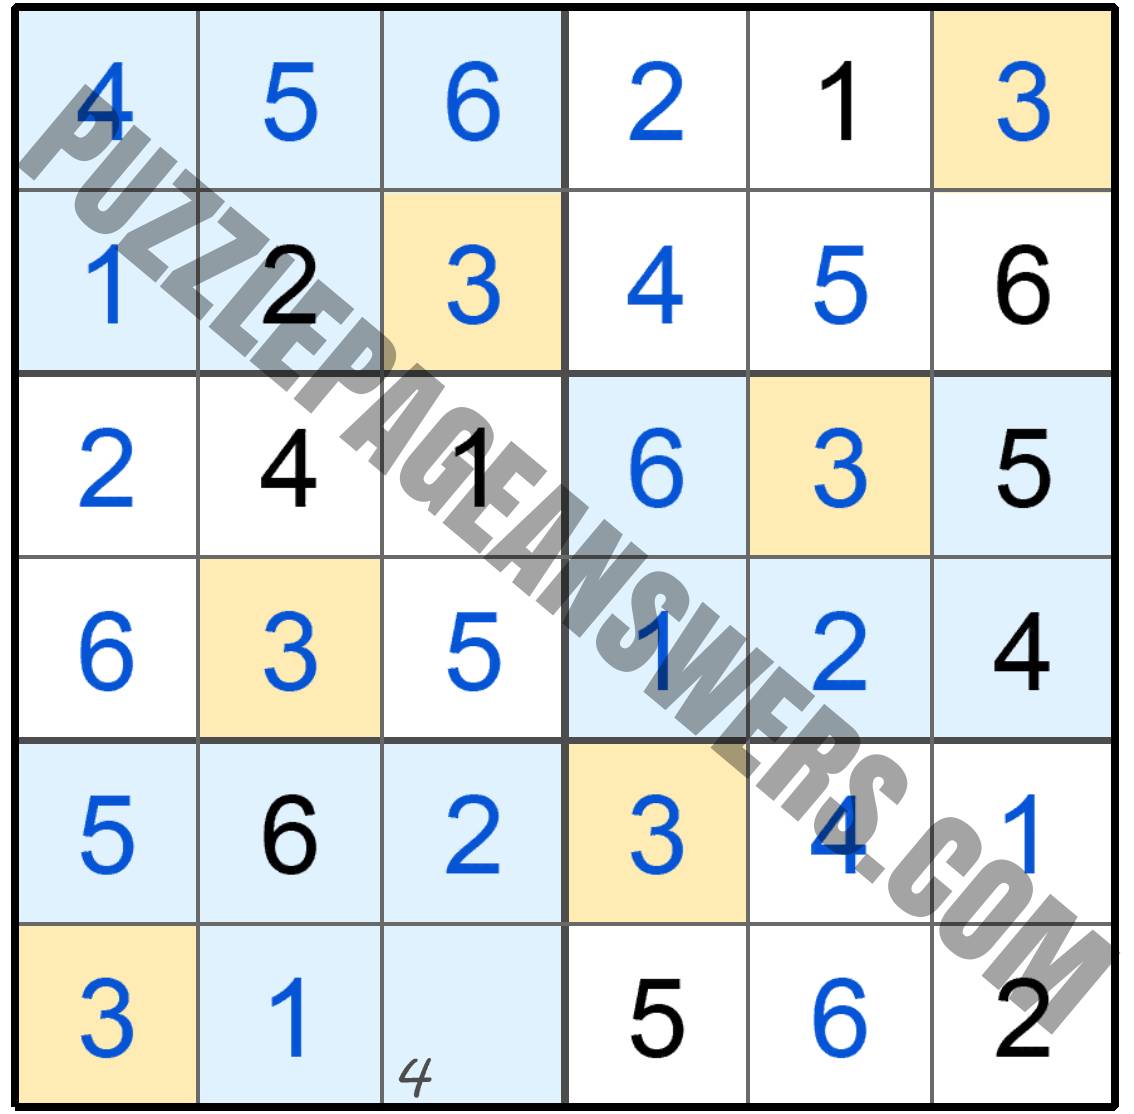 Puzzle Page Sudoku March 12 2021 Answers PuzzlePageAnswers com